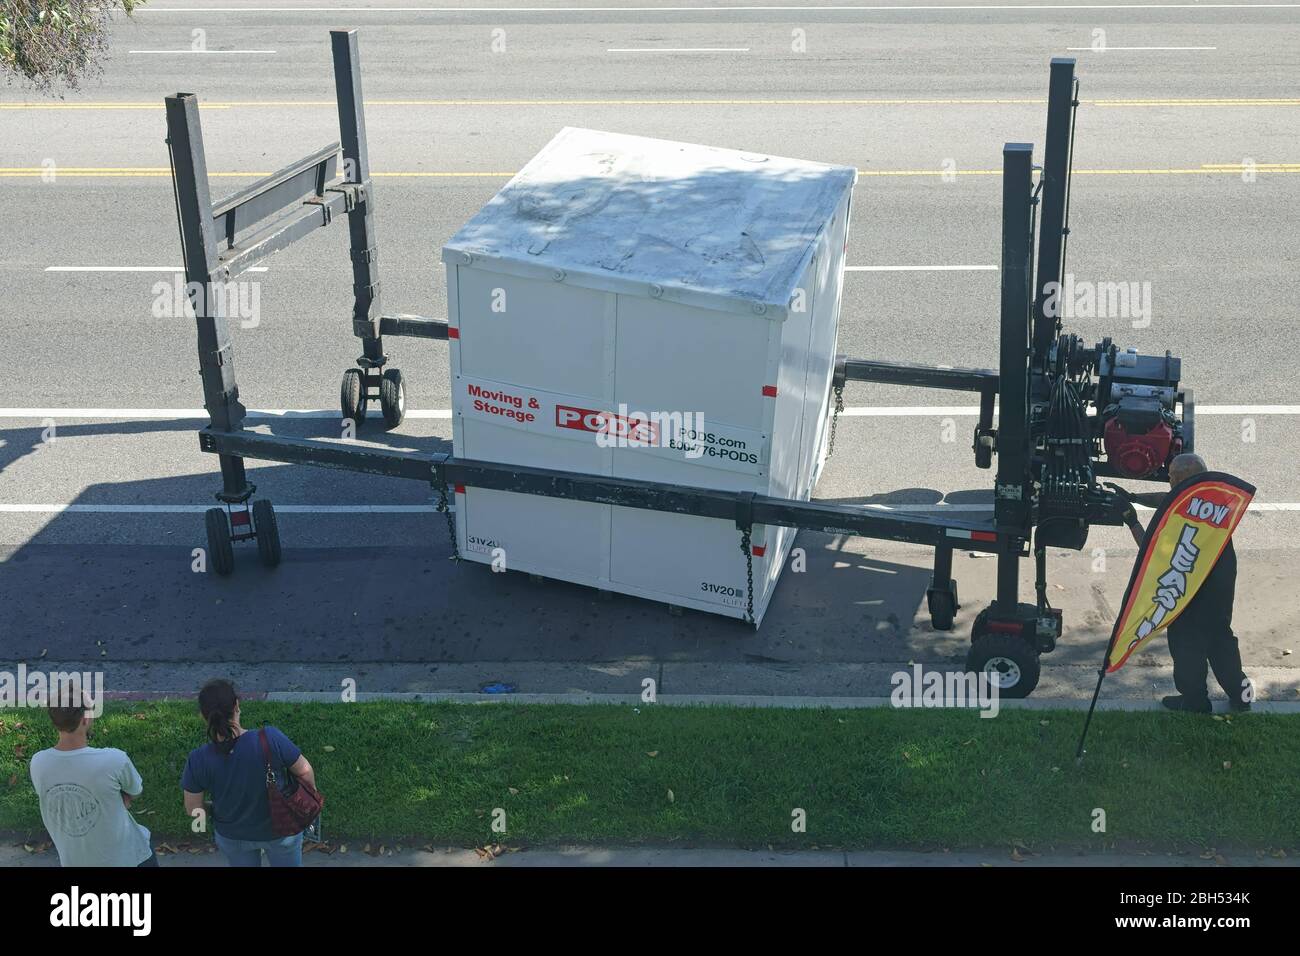 Los Angeles, CA / USA - April 21, 2020: A PODS company moving and storage small container cube is shown being moved in place, using a hydraulic lift. Stock Photo